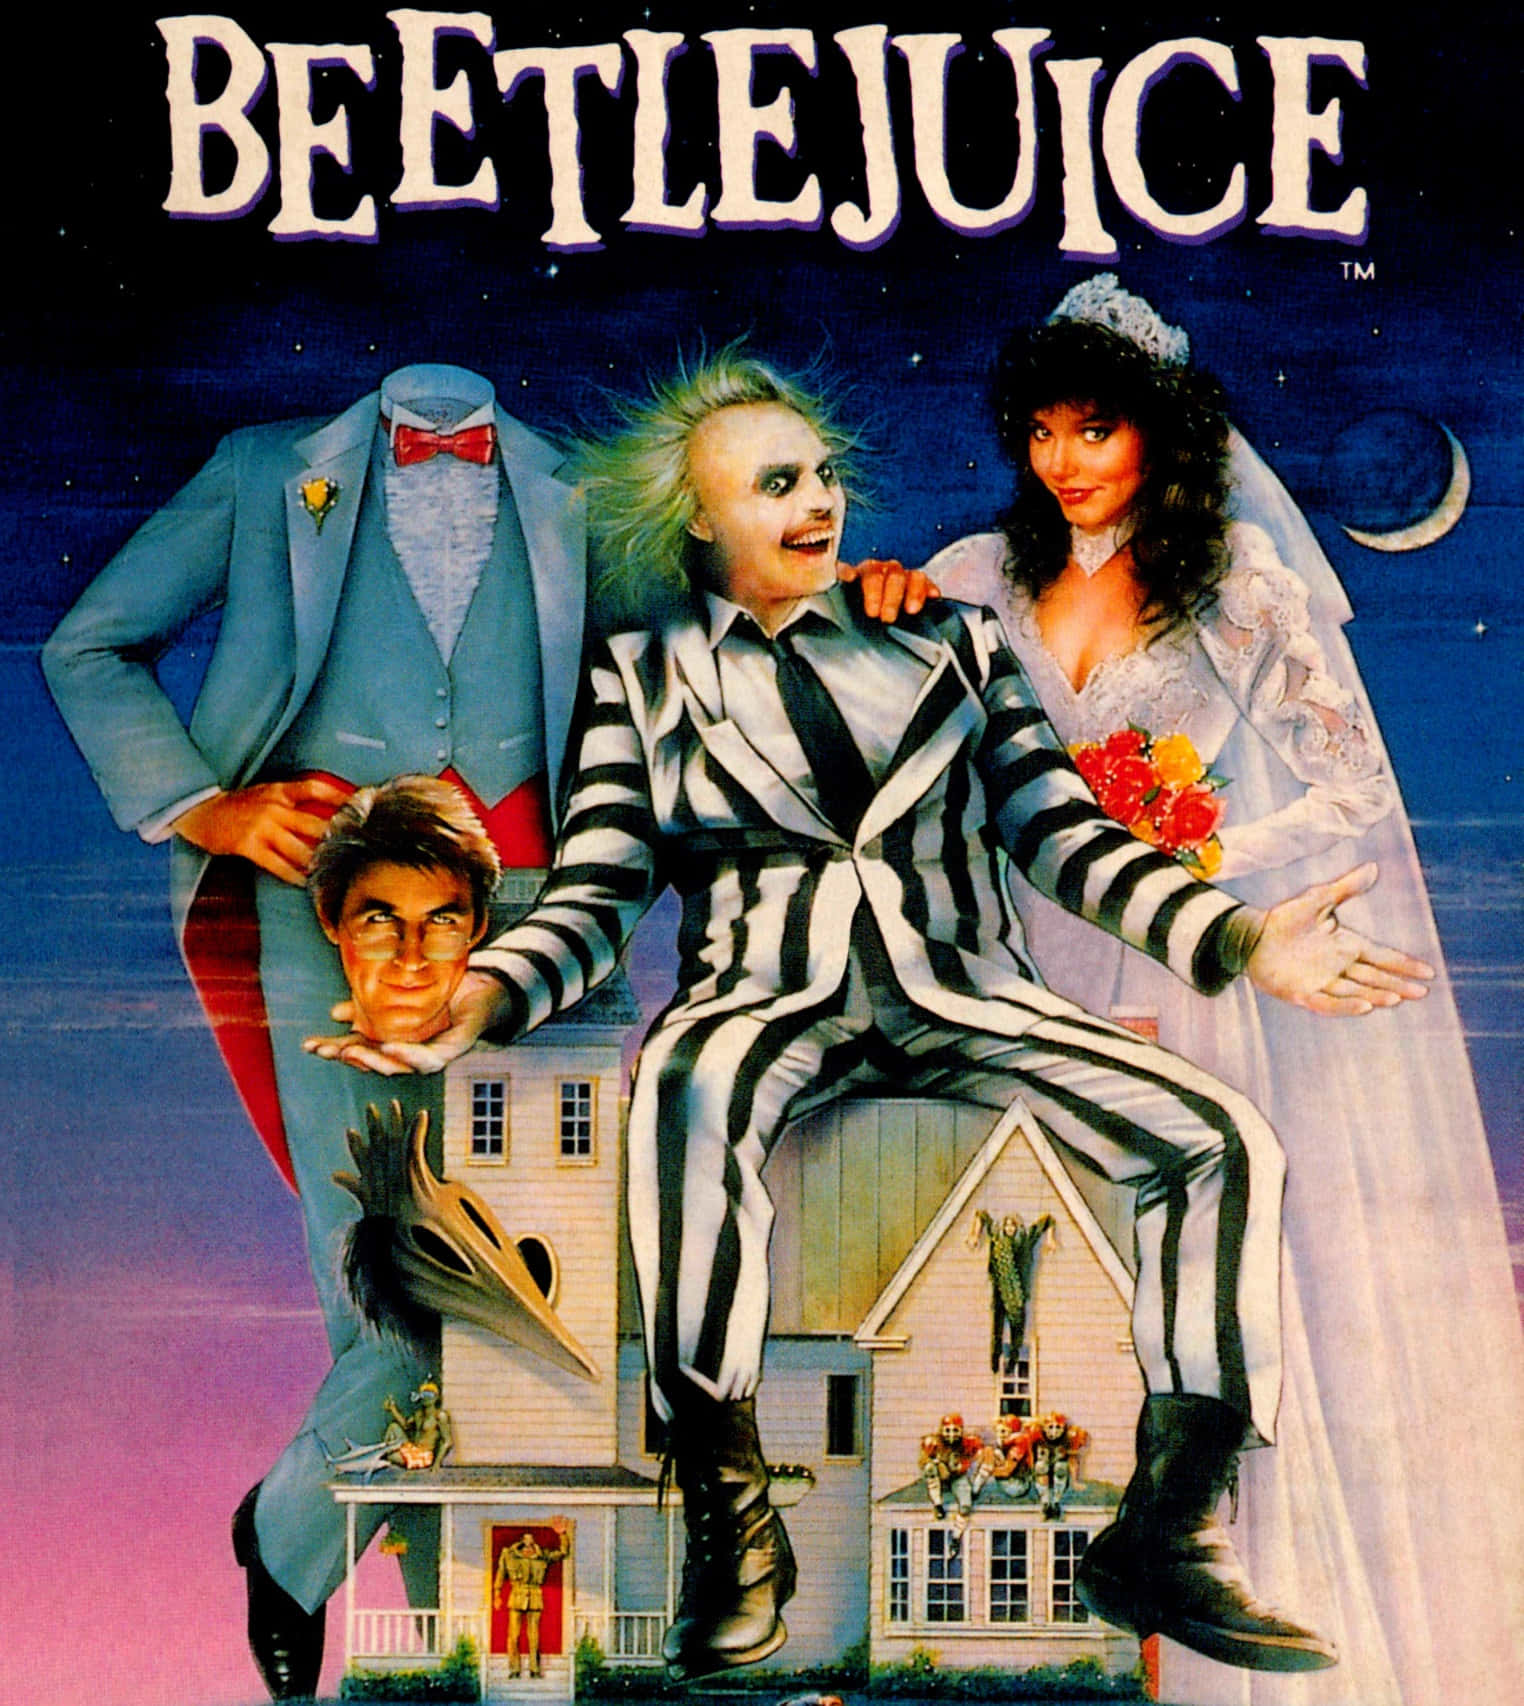 Beetlejuice 2, Johnny Depp has the world hooked on him and everything he does right now is not an exaggeration.